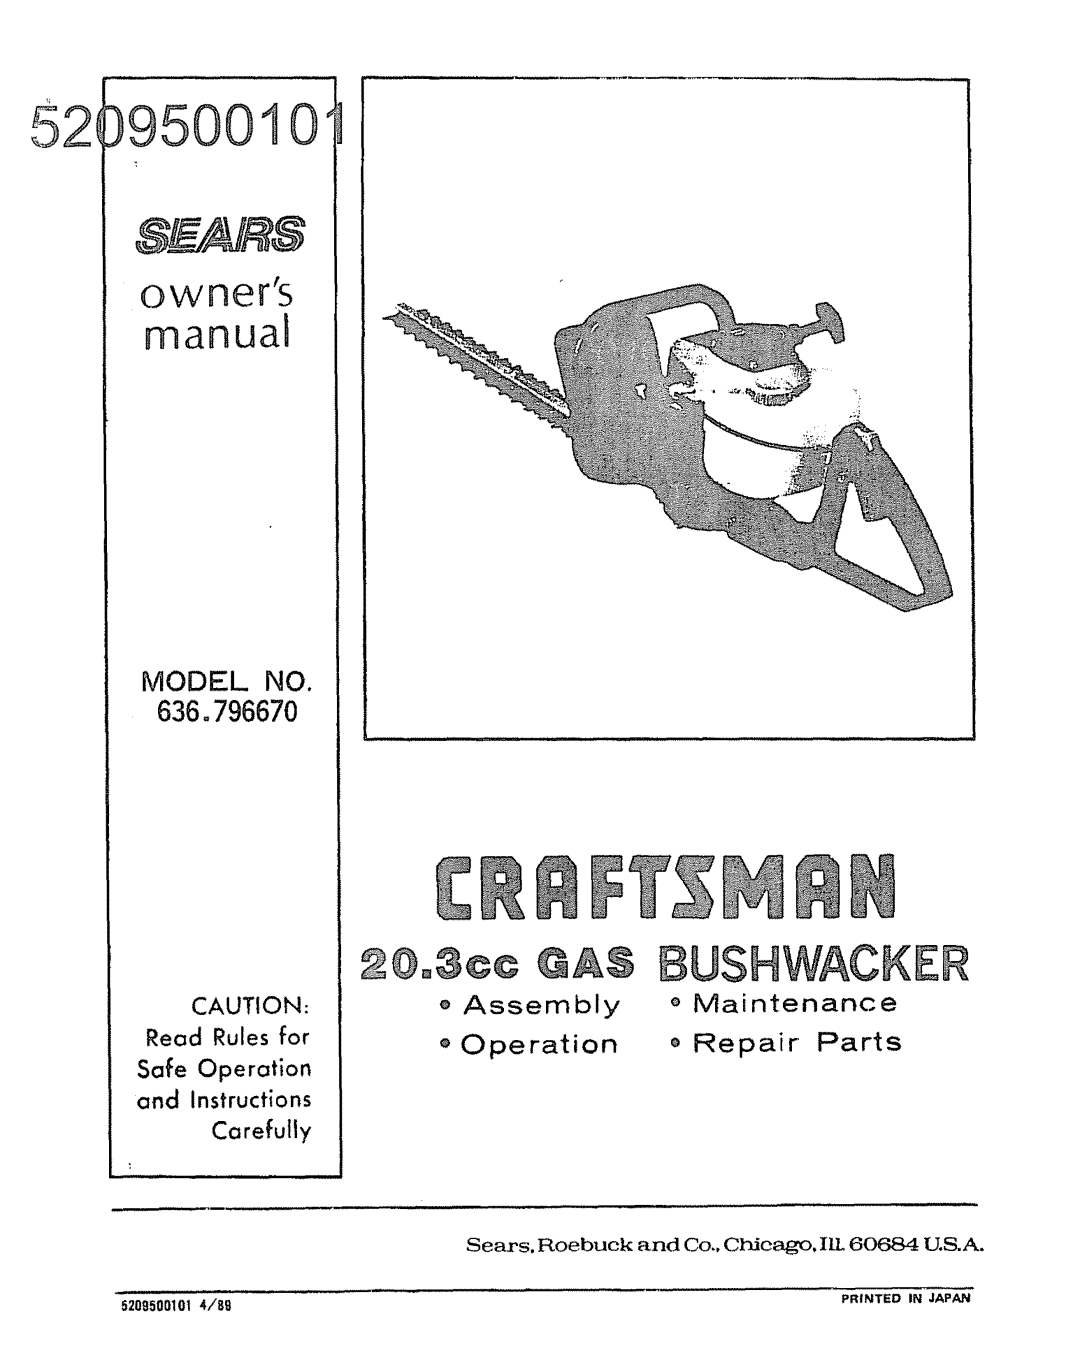 Craftsman 636.79667 manual owners, e Assembly, o Maintenance, Operation, o Repair, Parts, Read Rules for, Safe, Carefully 